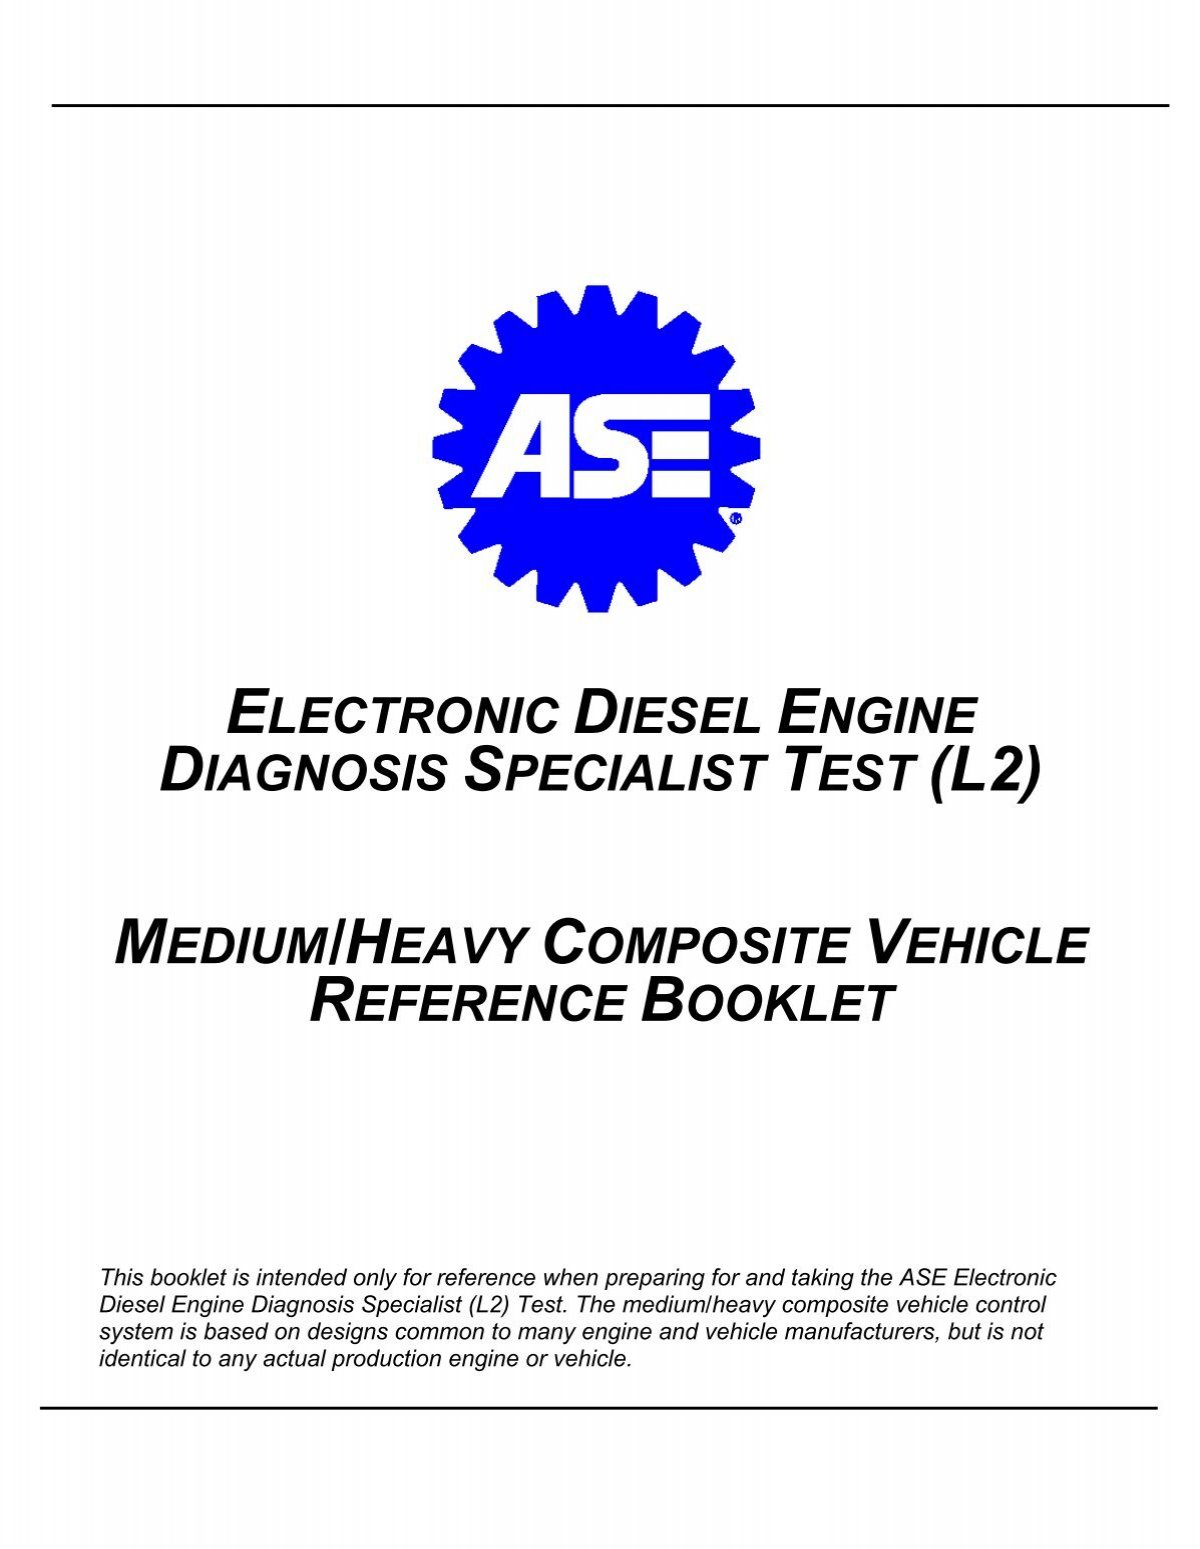 Electronic Diesel Engine Diagnosis Specialist Test L2